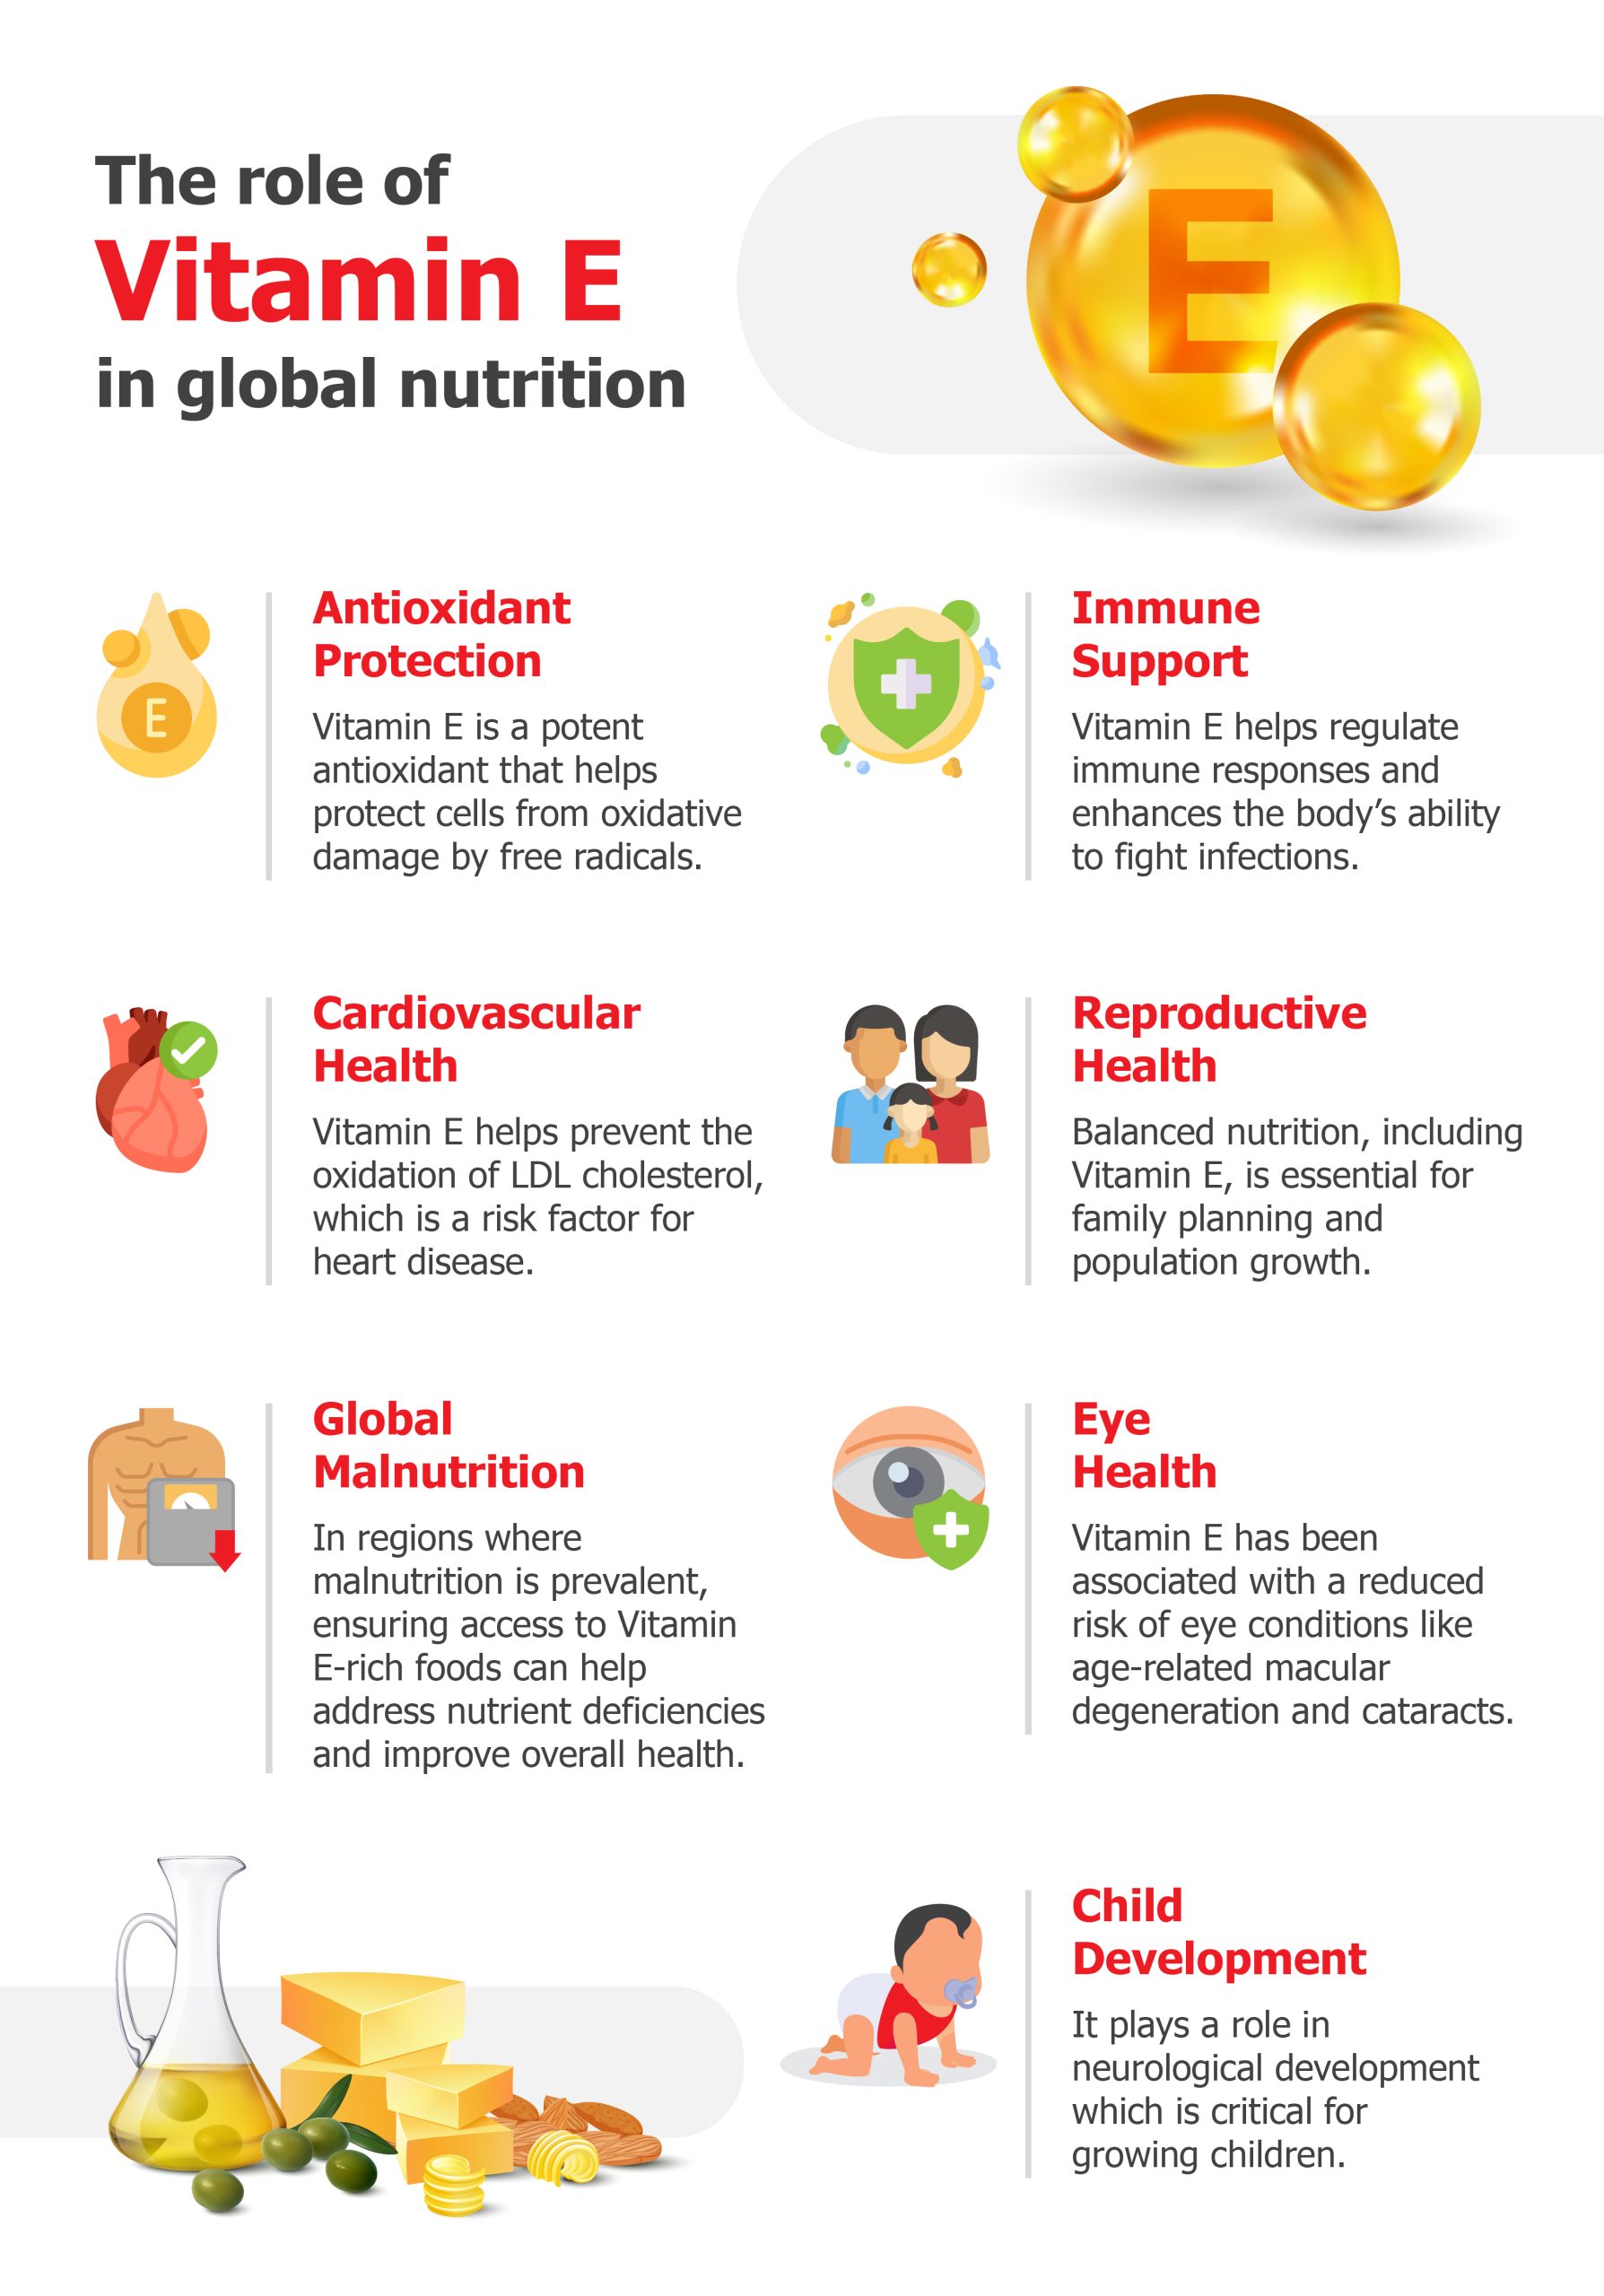 The role of Vitamin E in global nutrition